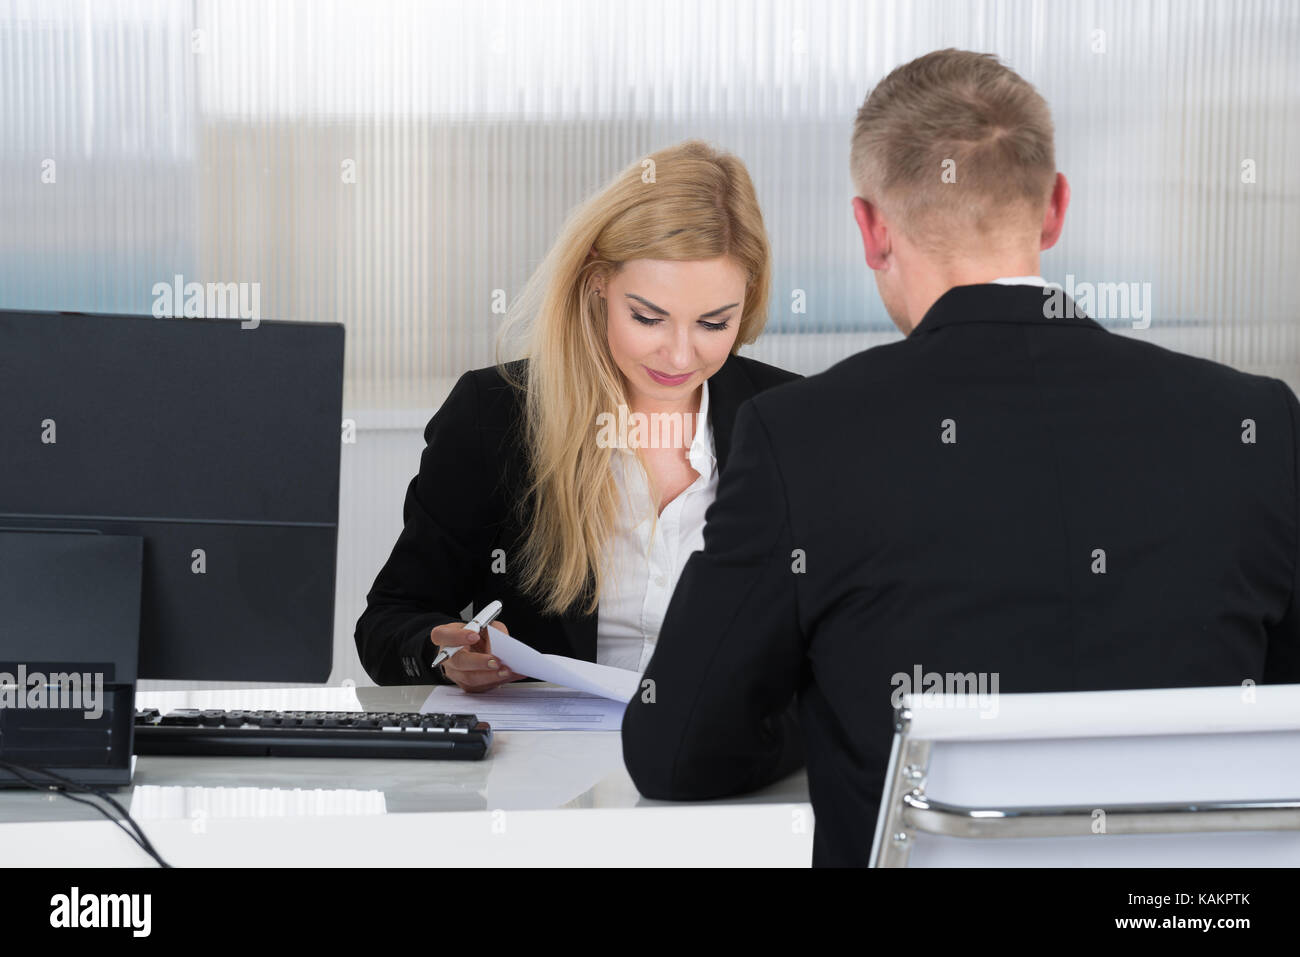 Young businesswoman interviewing job applicant at desk in office Stock Photo